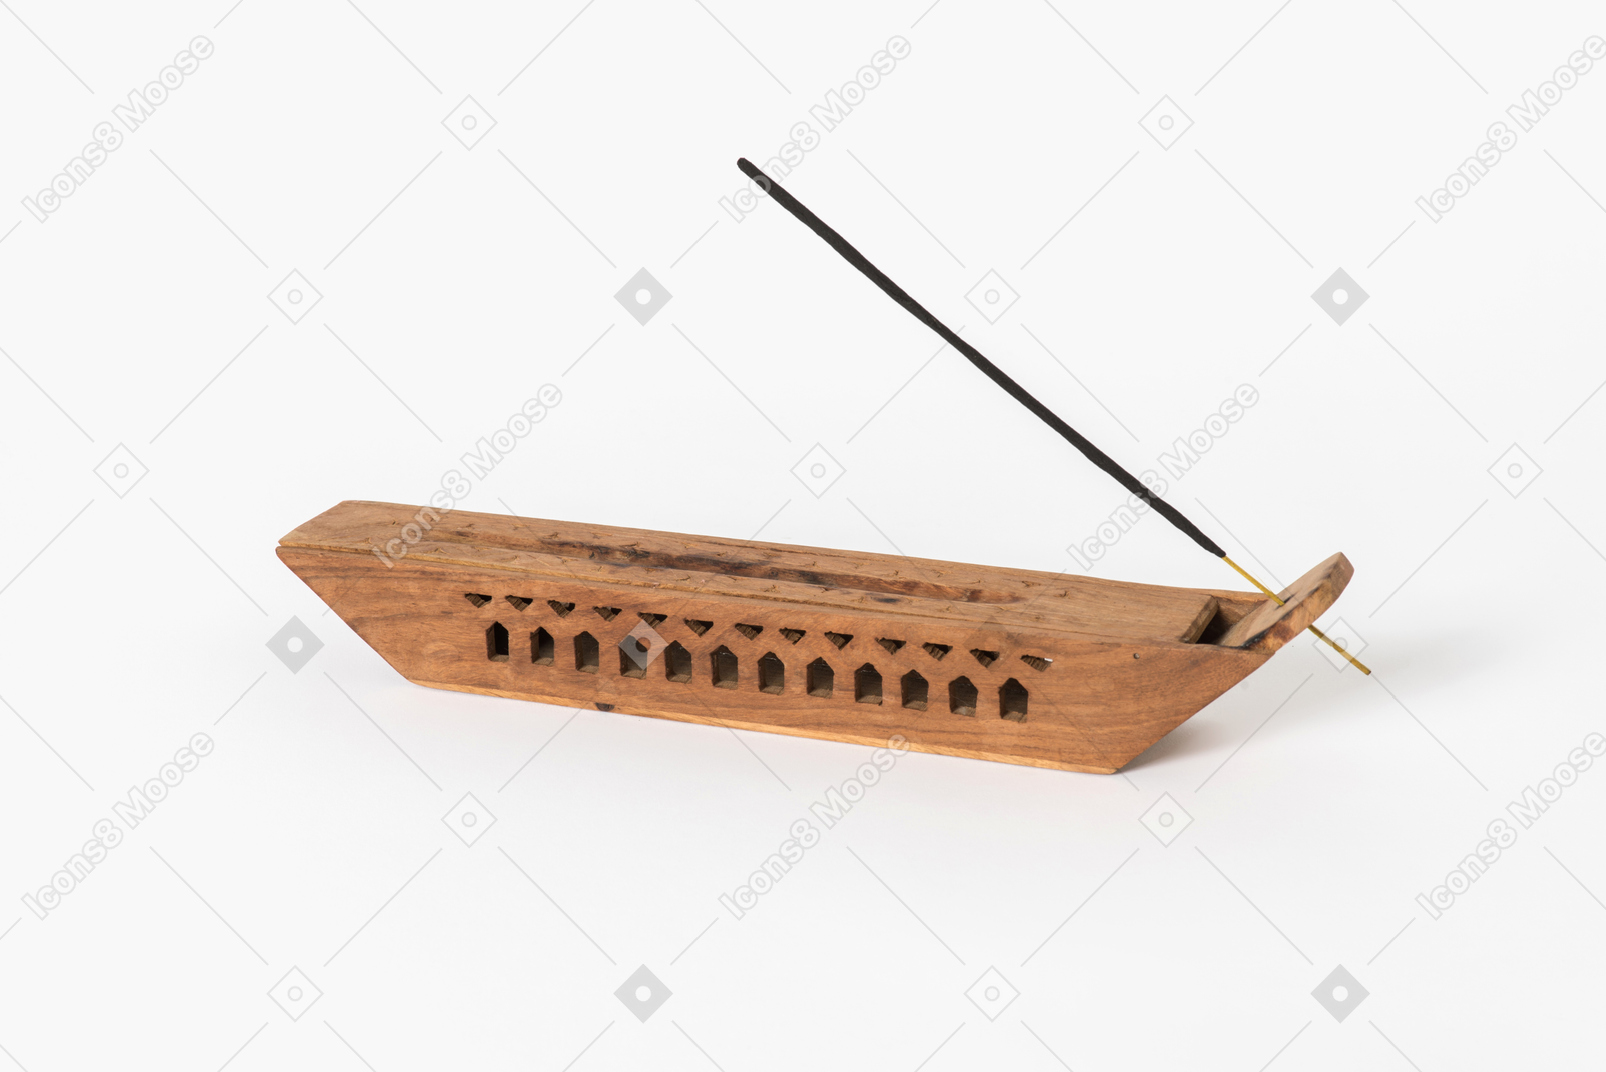 Incense stick stock in wooden boat